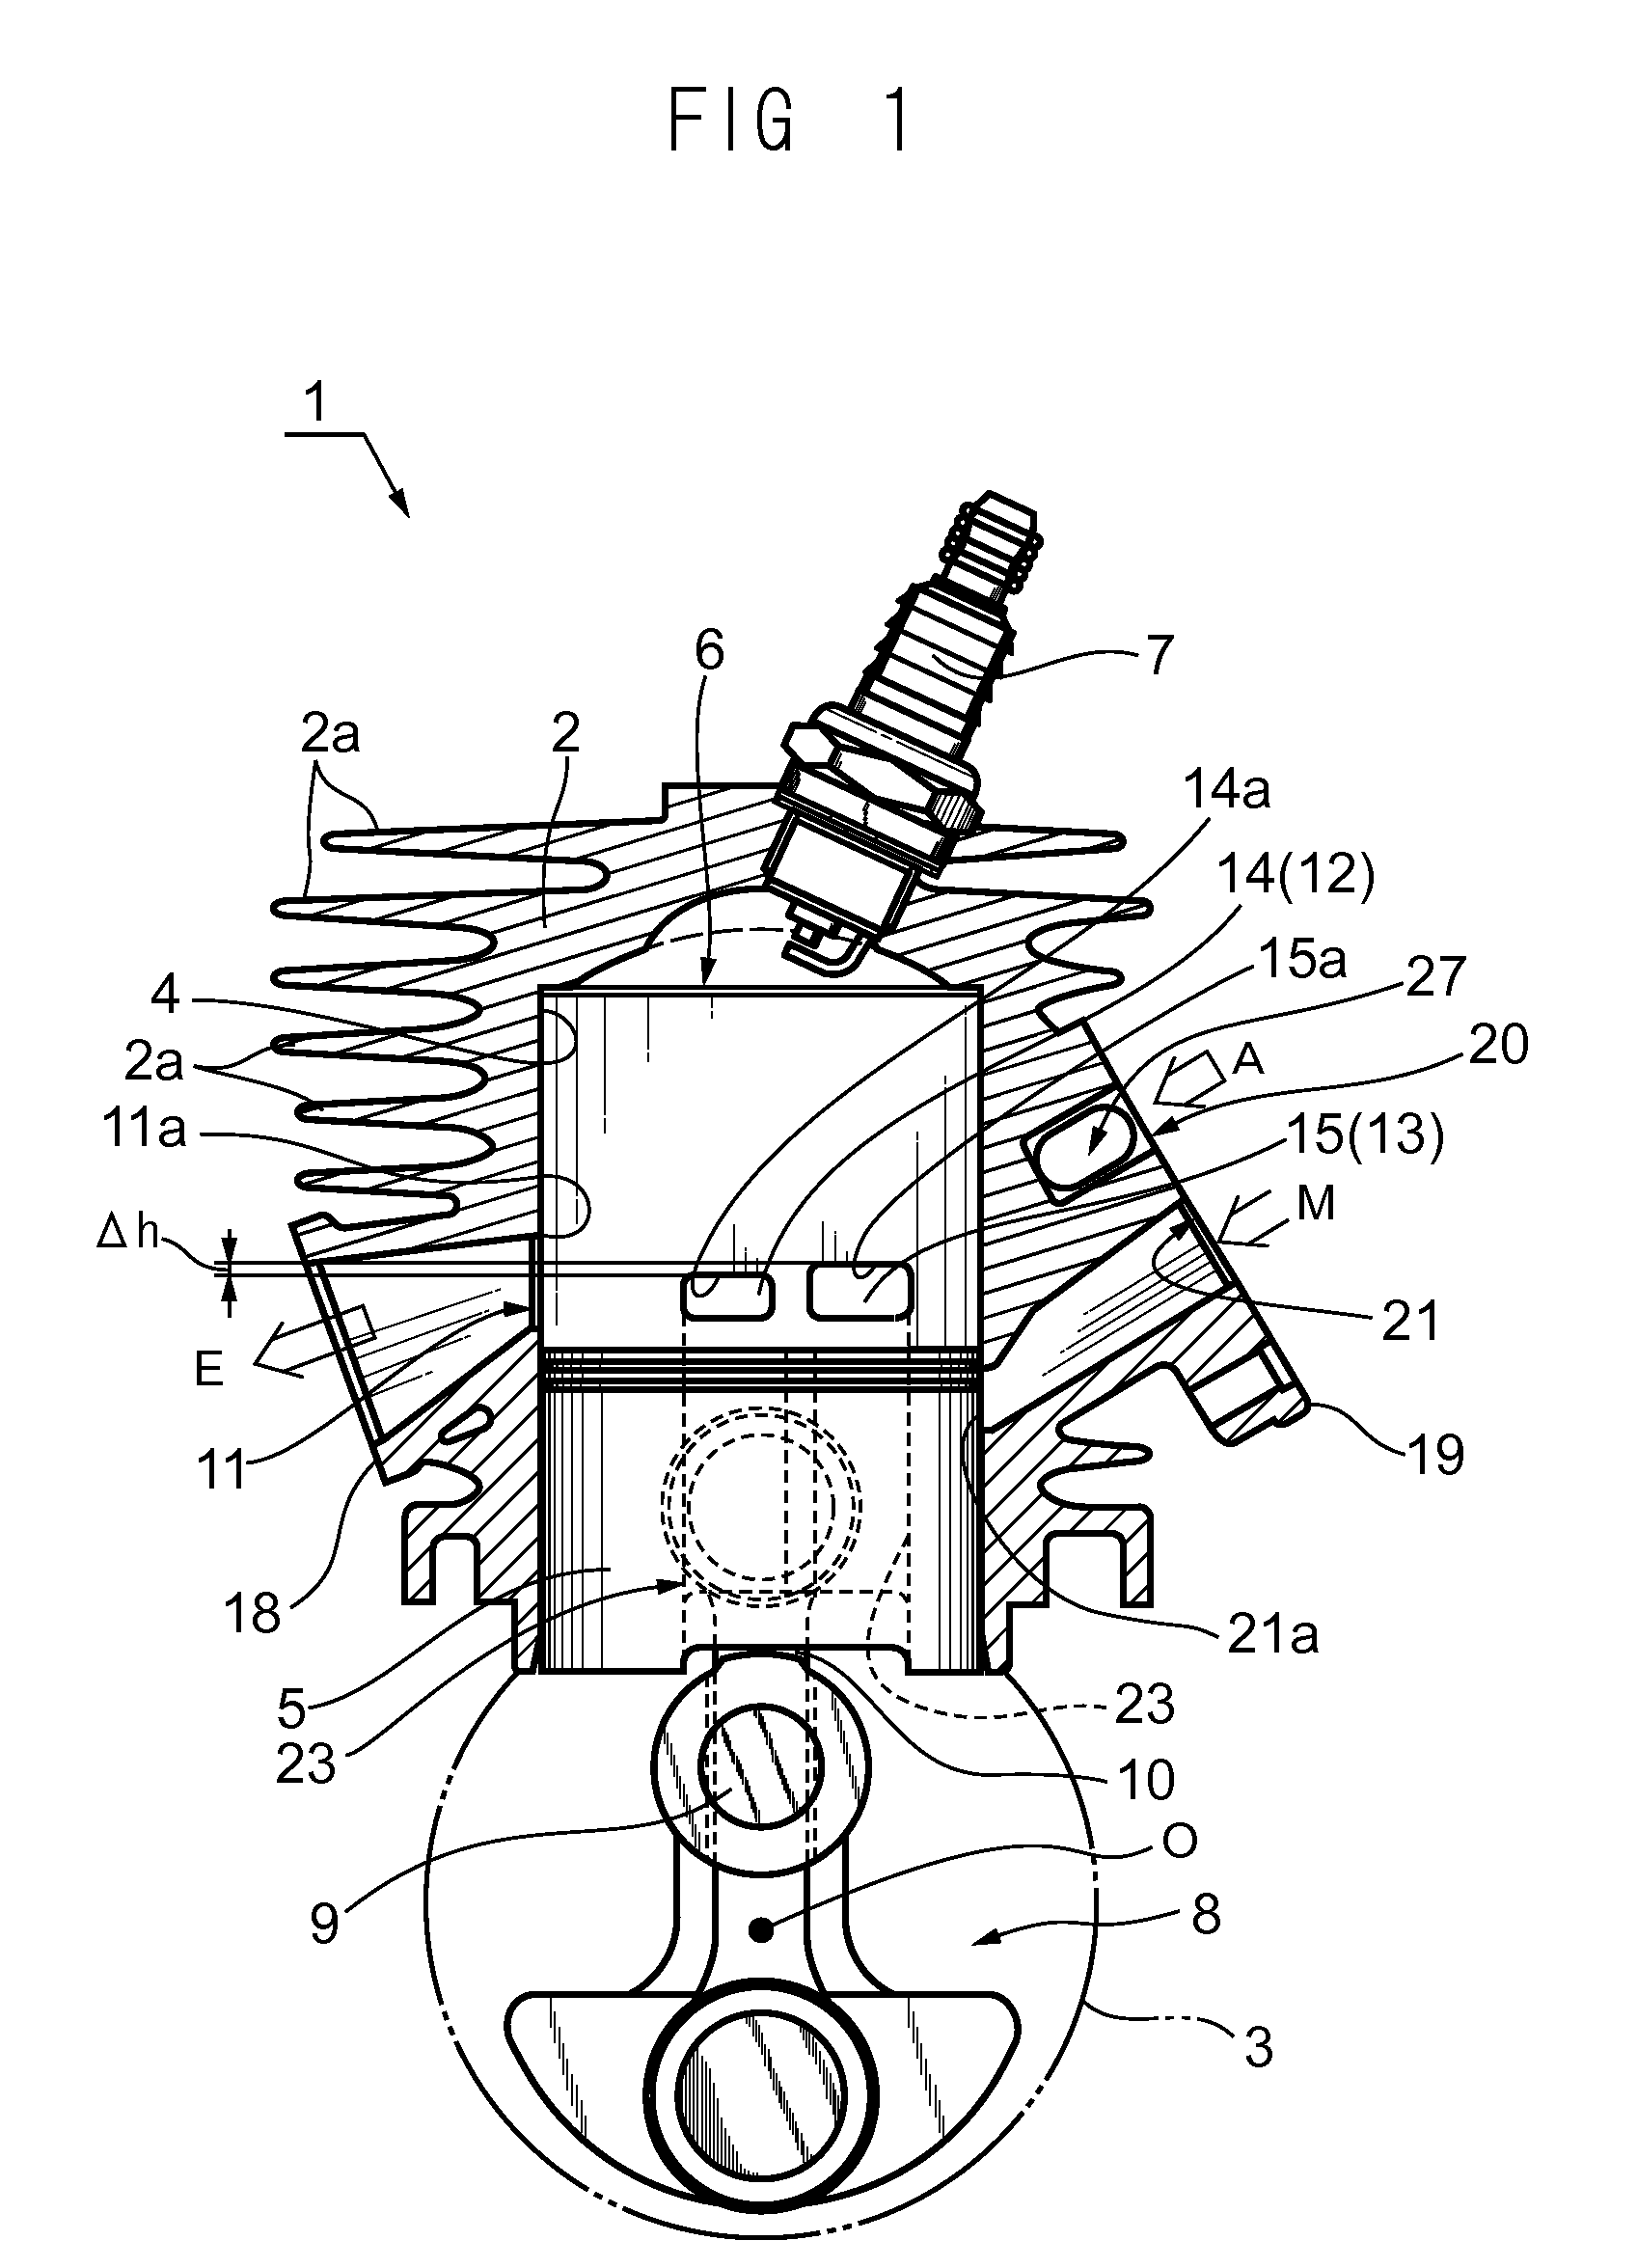 Two-Stroke Internal Combustion Engine